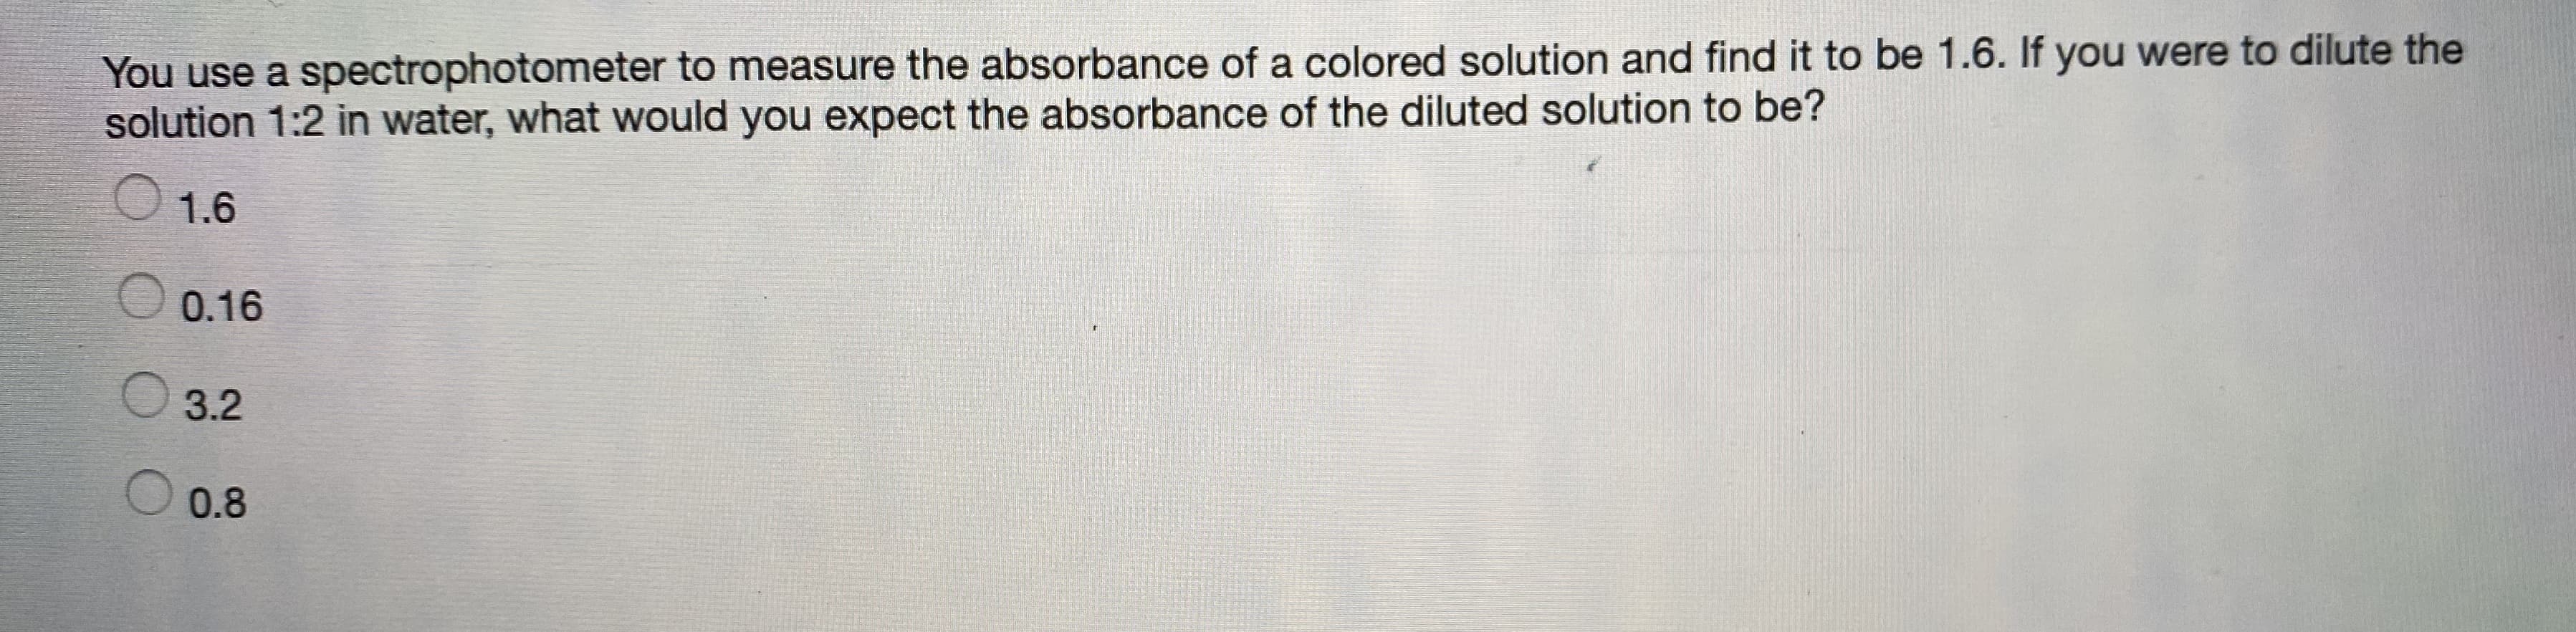 You use a spectrophotometer to measure the absorbance of a colored solution and find it to be 1.6. If you were to dilute the
solution 1:2 in water, what would you expect the absorbance of the diluted solution to be?
1.6
O 0.16
O 3.2
0.8
